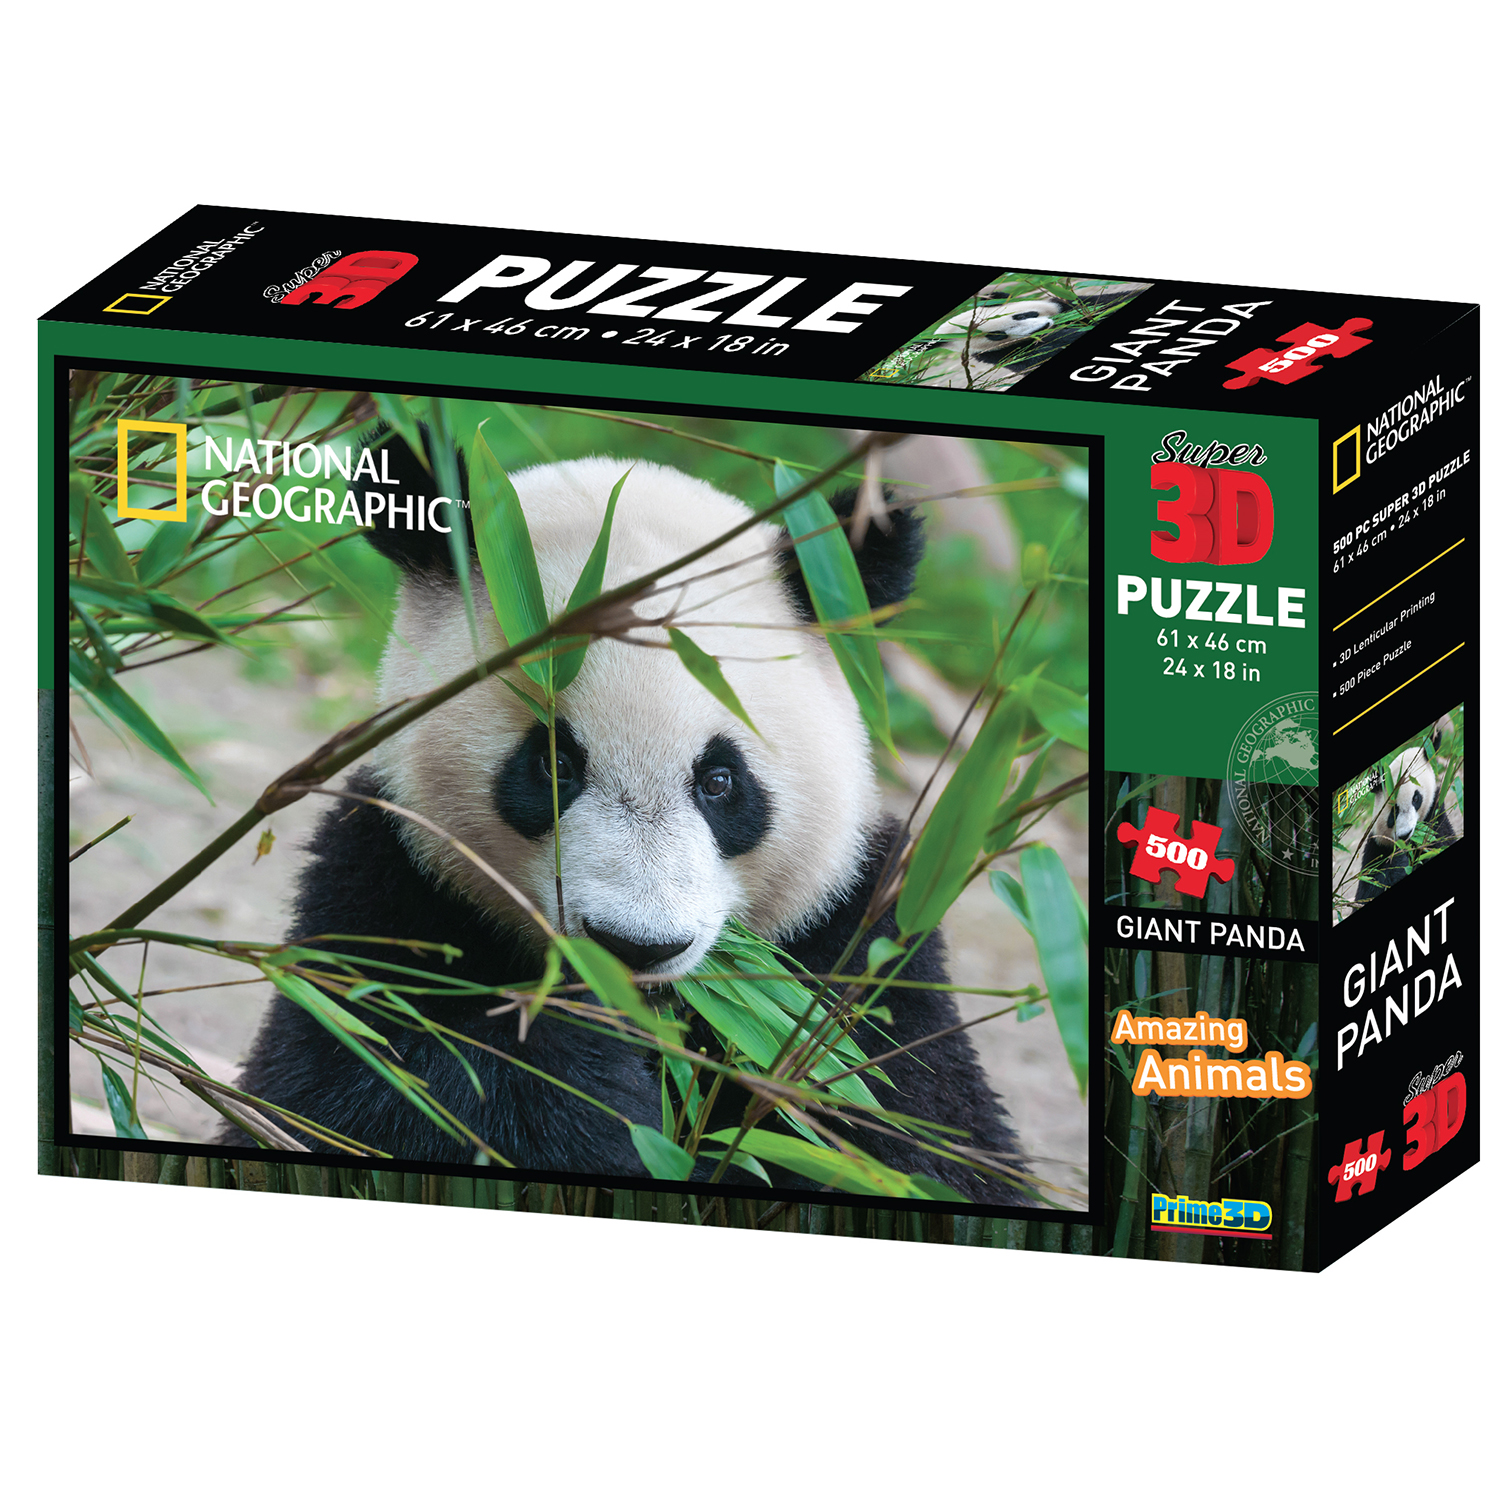 Giant Pandas Shaped Jigsaw Puzzle National Geographic 1000 Piece for sale online 